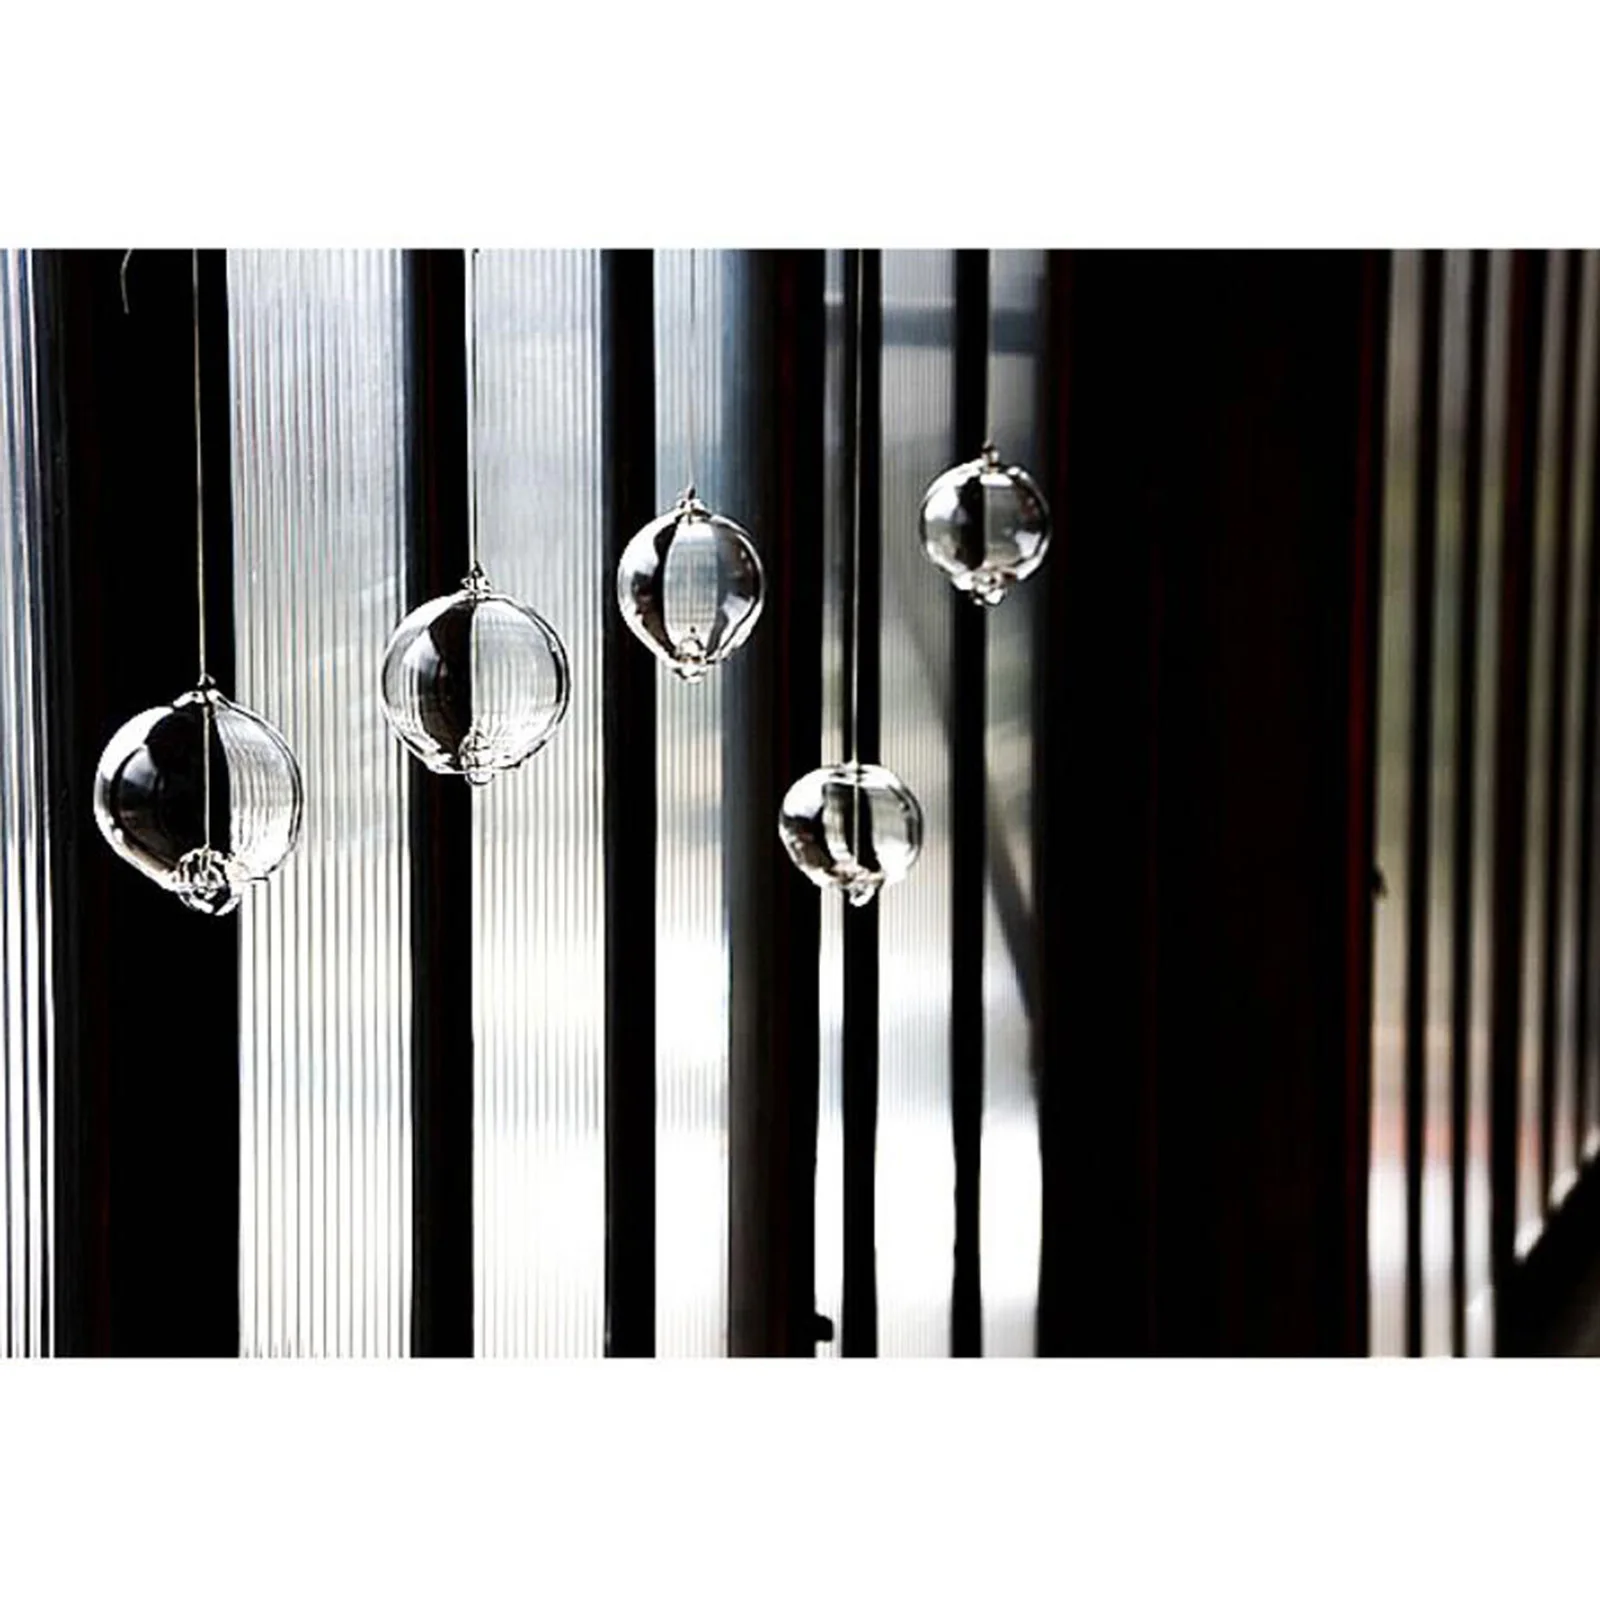 Japanese style glass wind chime wind hanging bells doorbell modern home pendant decoration ornaments